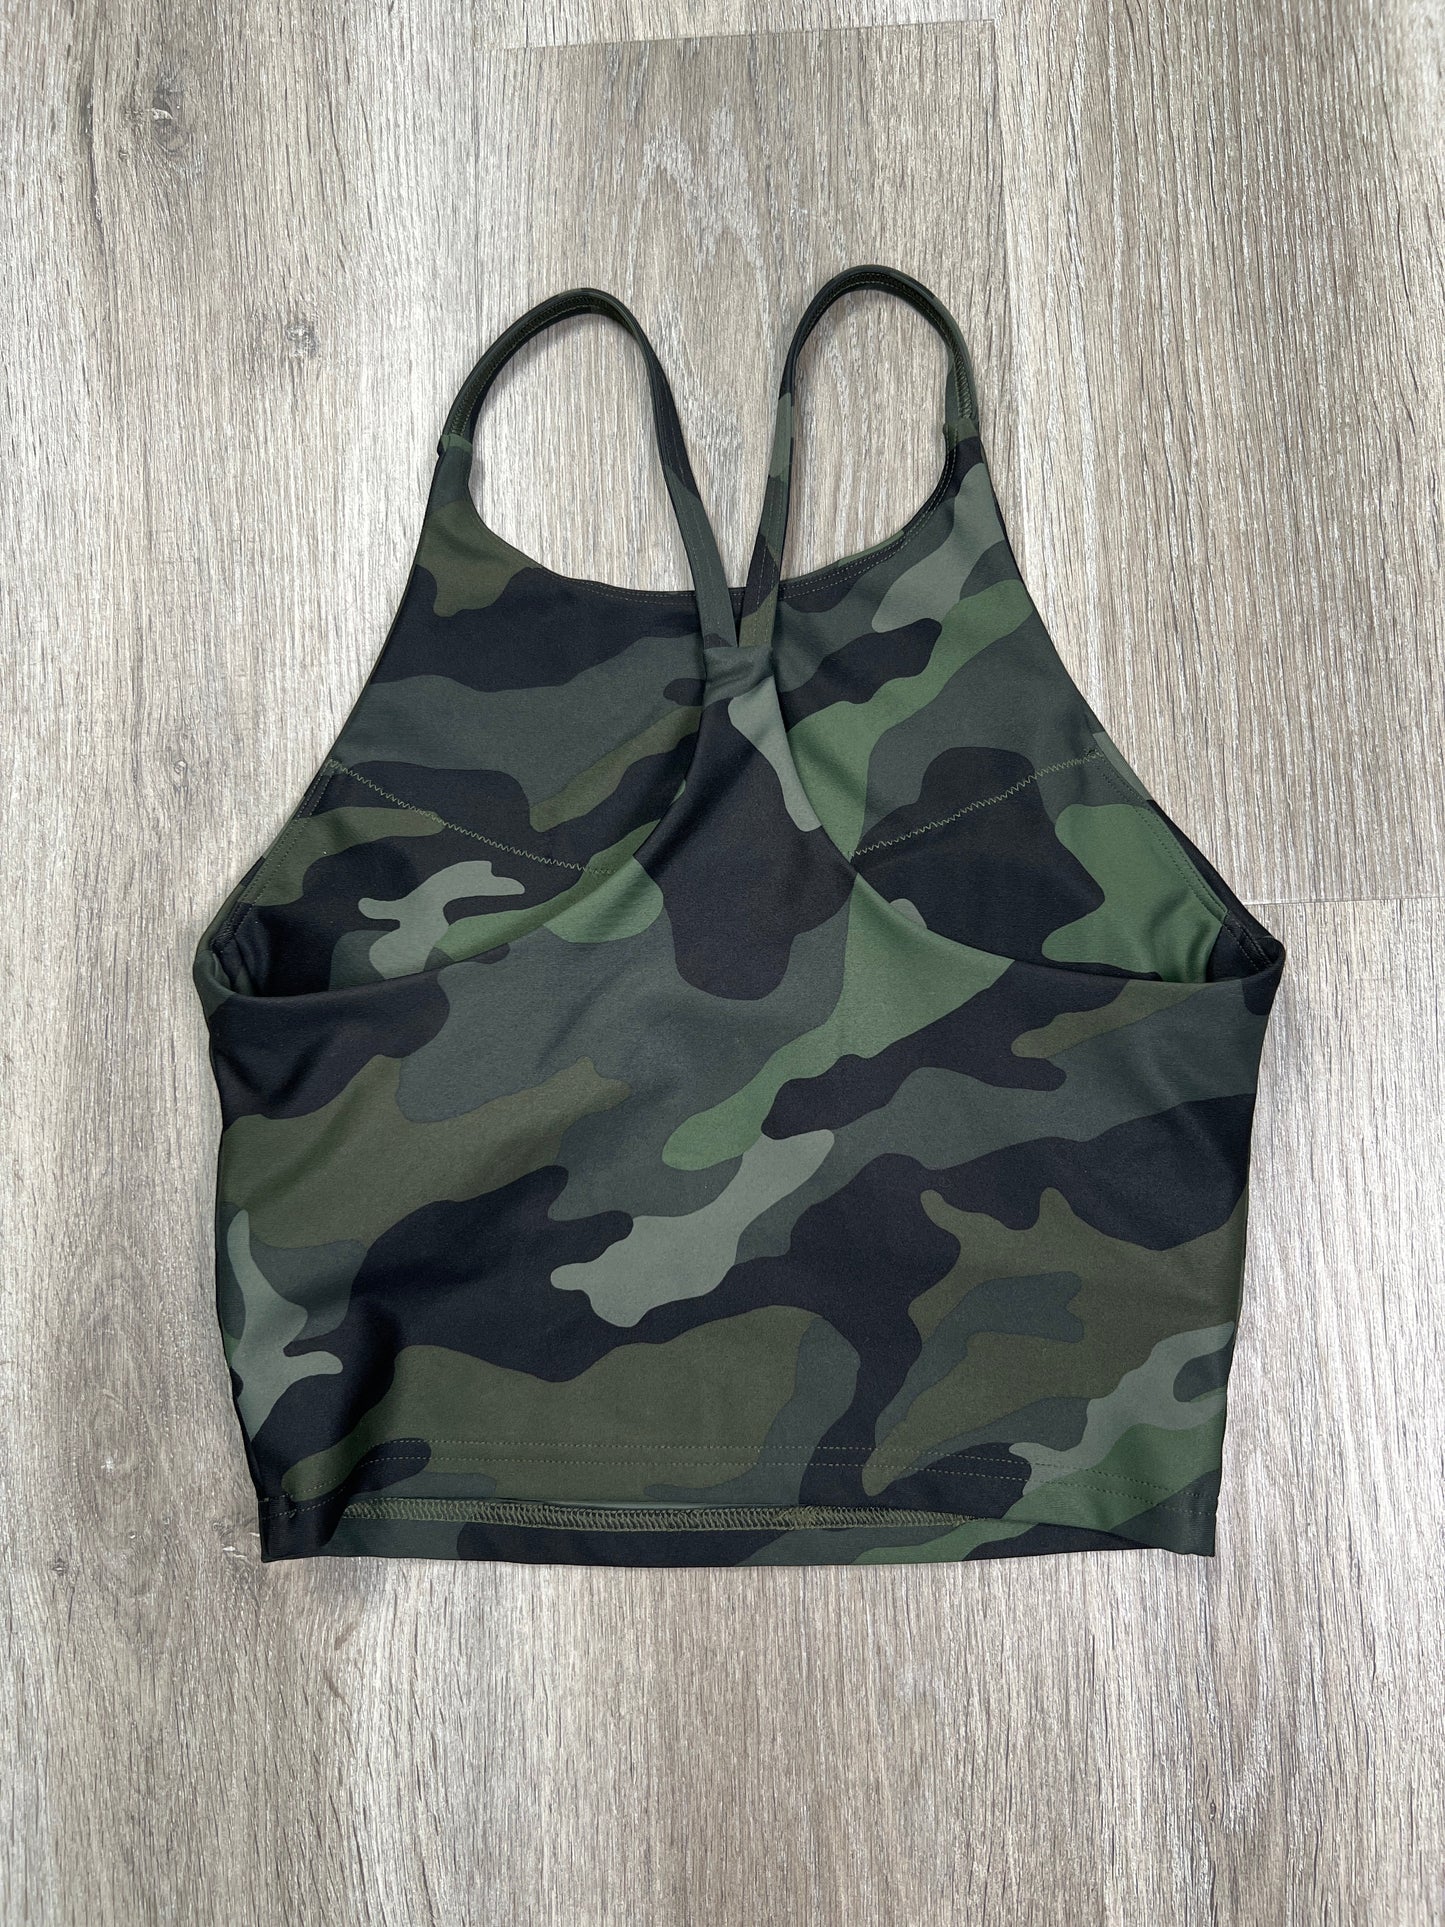 Camouflage Print Athletic Bra Old Navy, Size S